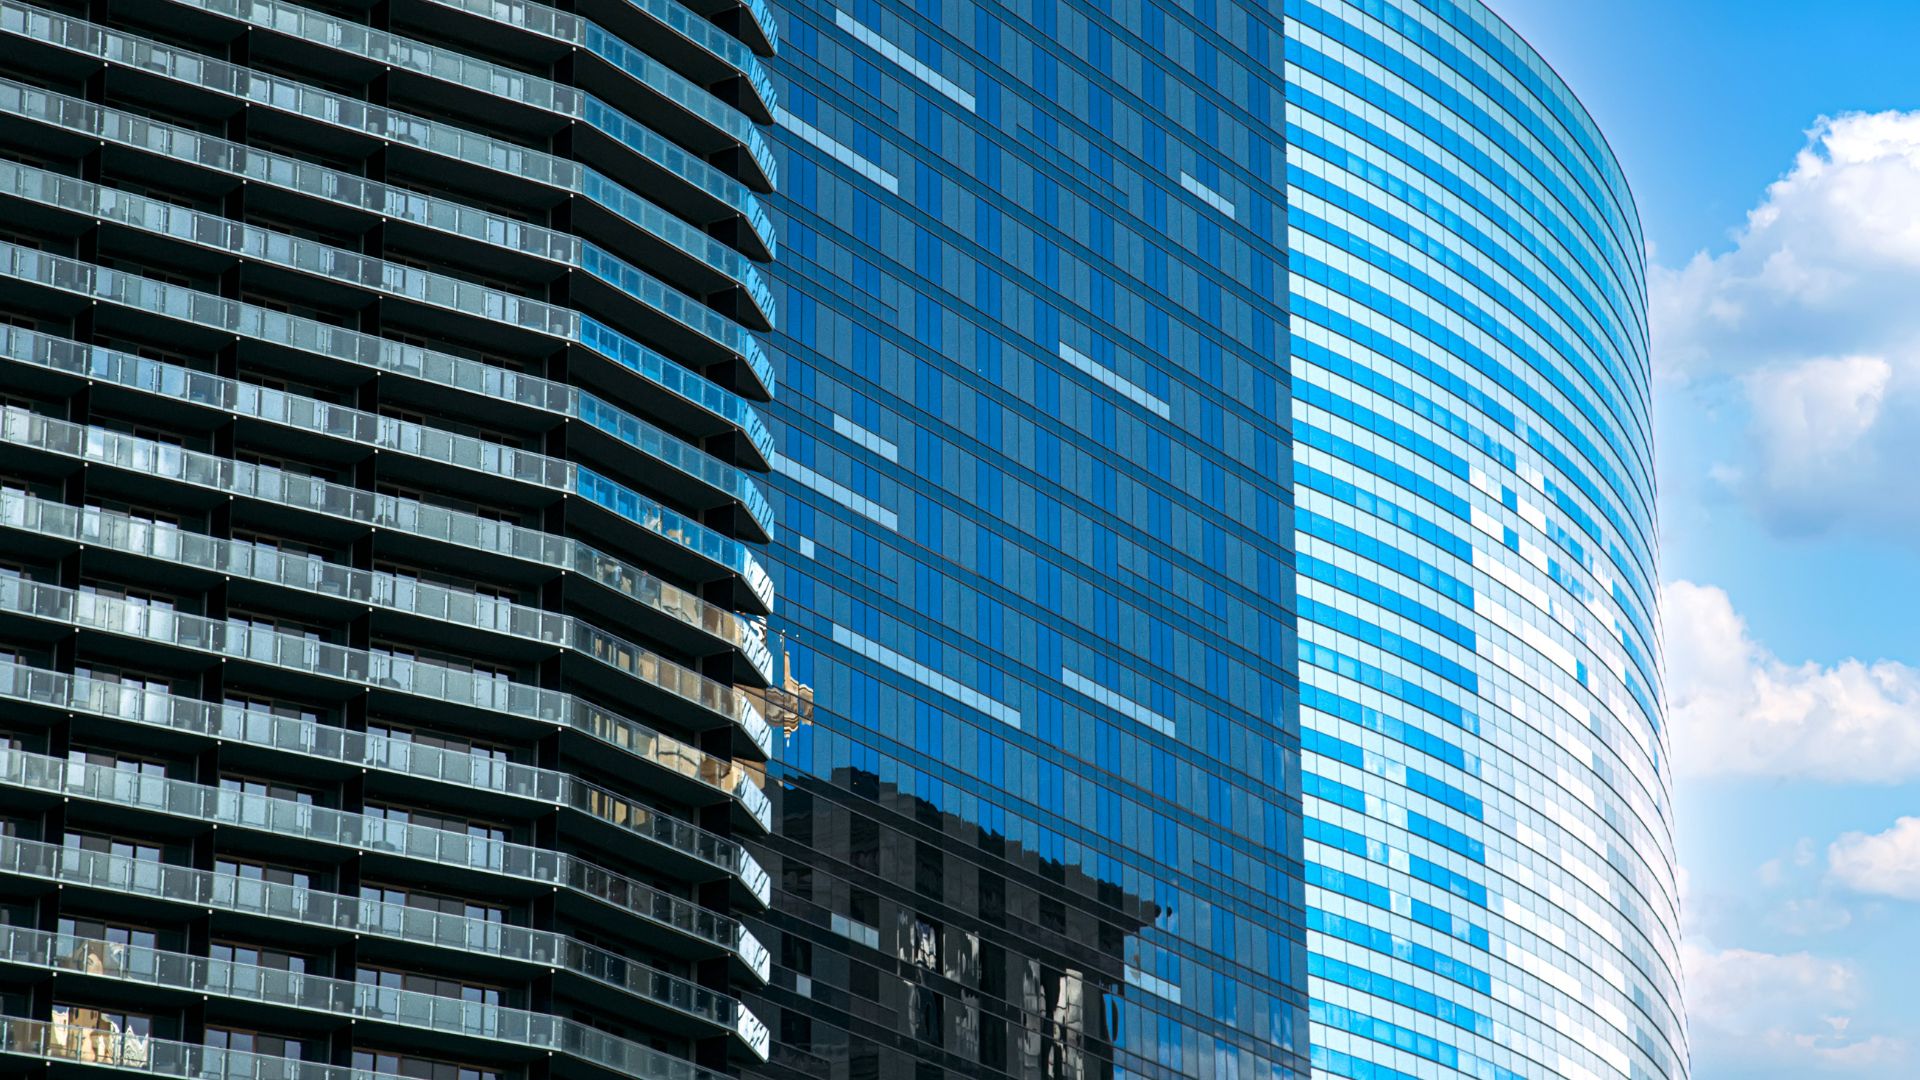 External view of a glass-sided skyscraper, reflecting the blue sky on a sunny day